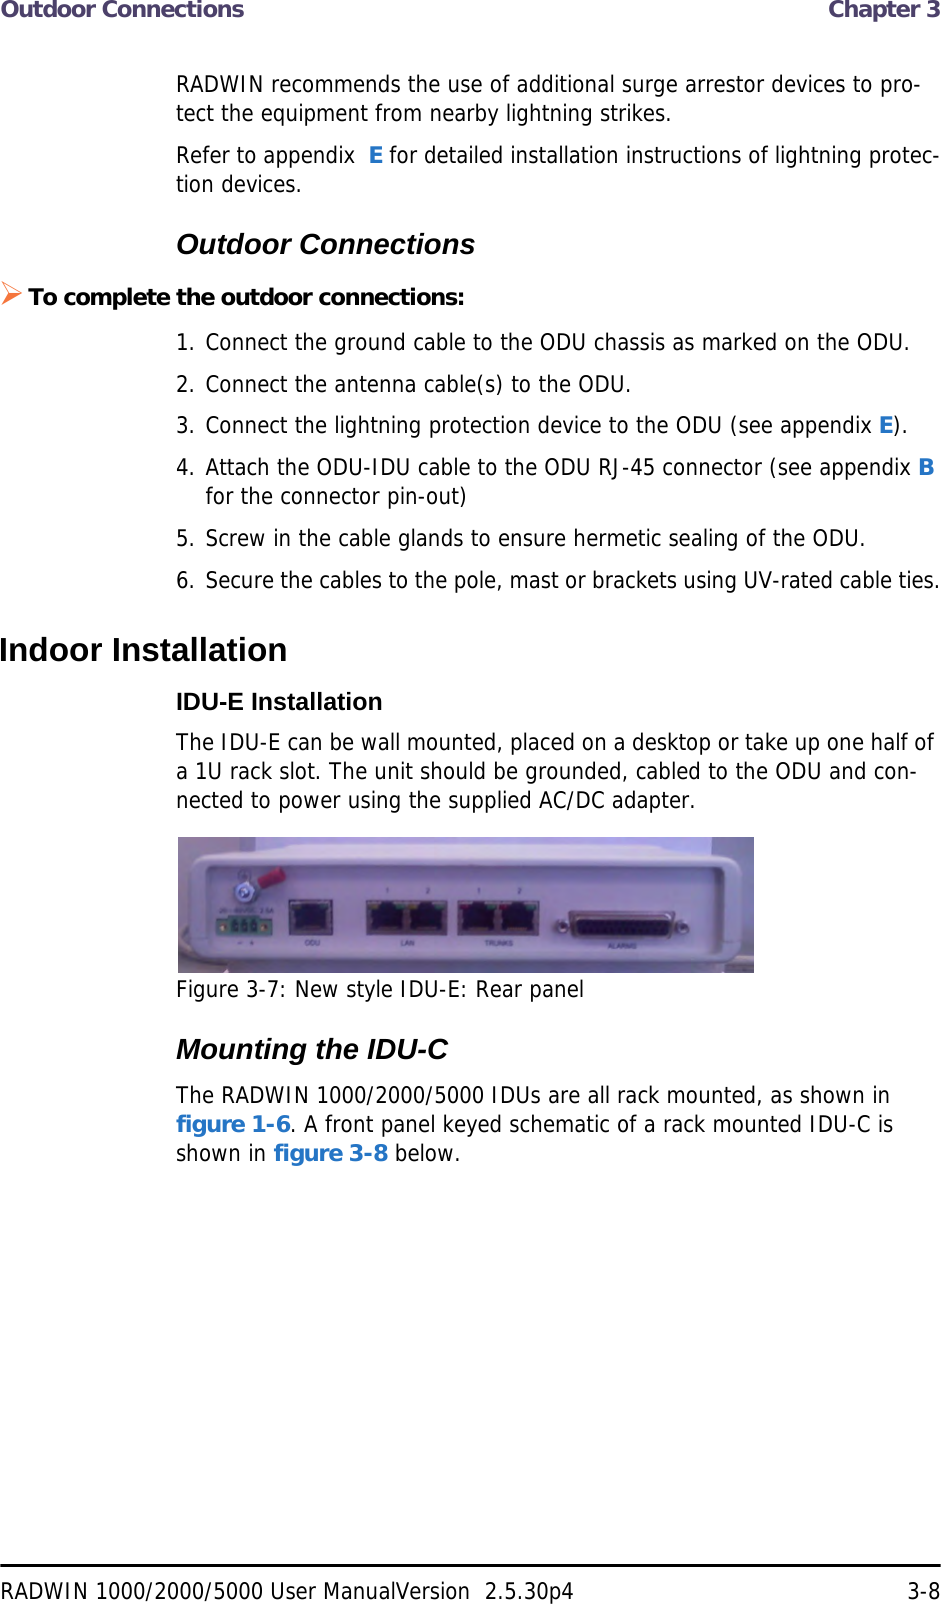 Outdoor Connections  Chapter 3RADWIN 1000/2000/5000 User ManualVersion  2.5.30p4 3-8RADWIN recommends the use of additional surge arrestor devices to pro-tect the equipment from nearby lightning strikes.Refer to appendix  E for detailed installation instructions of lightning protec-tion devices.Outdoor ConnectionsTo complete the outdoor connections:1. Connect the ground cable to the ODU chassis as marked on the ODU.2. Connect the antenna cable(s) to the ODU.3. Connect the lightning protection device to the ODU (see appendix E).4. Attach the ODU-IDU cable to the ODU RJ-45 connector (see appendix B for the connector pin-out)5. Screw in the cable glands to ensure hermetic sealing of the ODU.6. Secure the cables to the pole, mast or brackets using UV-rated cable ties.Indoor InstallationIDU-E InstallationThe IDU-E can be wall mounted, placed on a desktop or take up one half of a 1U rack slot. The unit should be grounded, cabled to the ODU and con-nected to power using the supplied AC/DC adapter.Figure 3-7: New style IDU-E: Rear panelMounting the IDU-CThe RADWIN 1000/2000/5000 IDUs are all rack mounted, as shown in figure 1-6. A front panel keyed schematic of a rack mounted IDU-C is shown in figure 3-8 below.